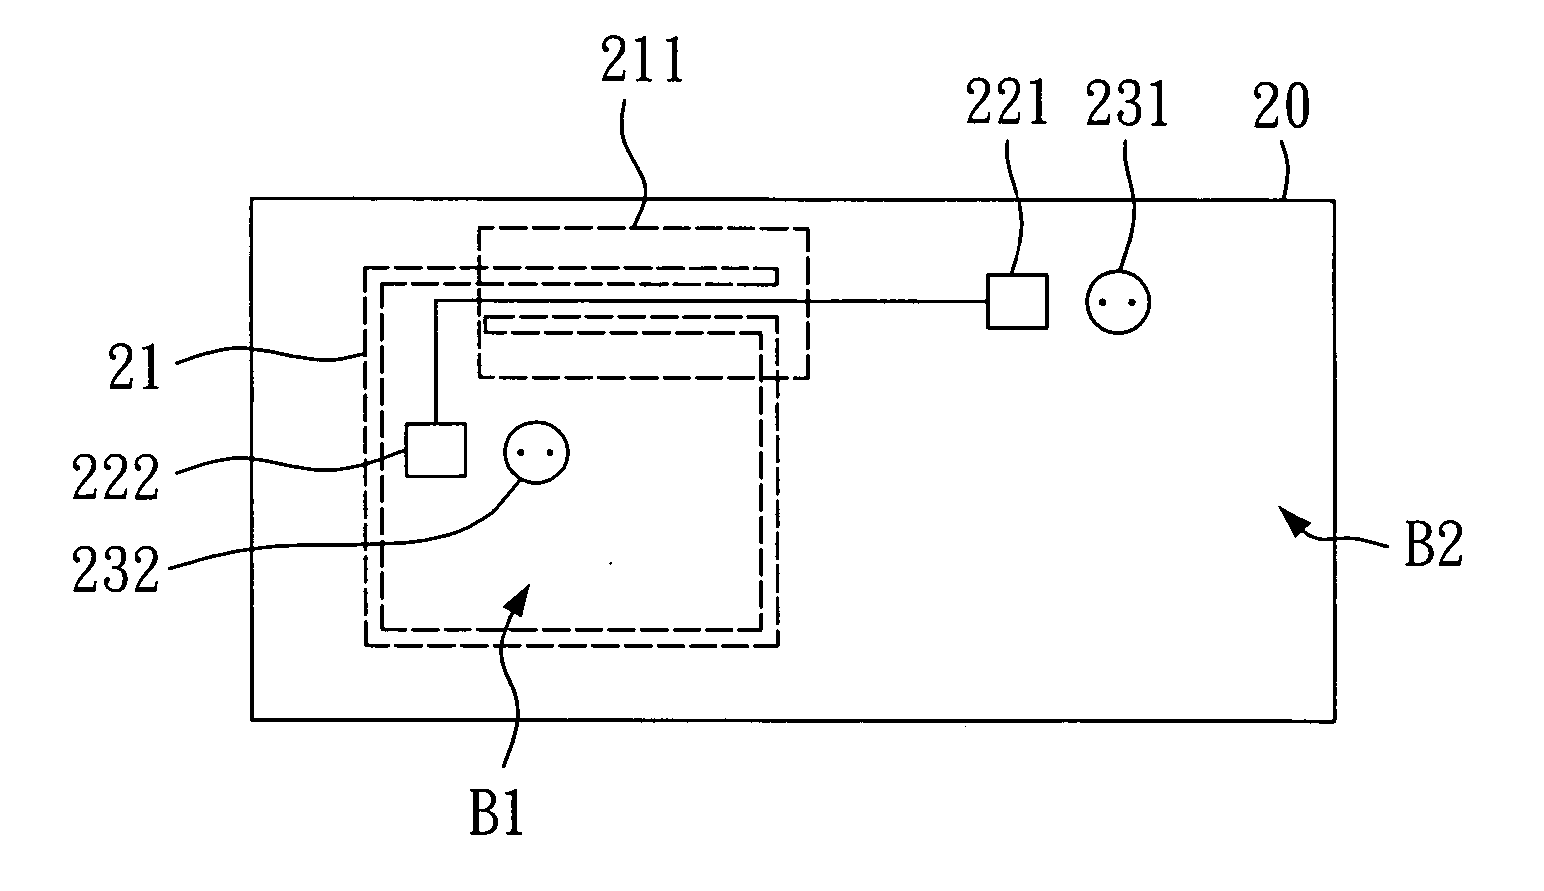 Multi-layer printed circuit with low noise